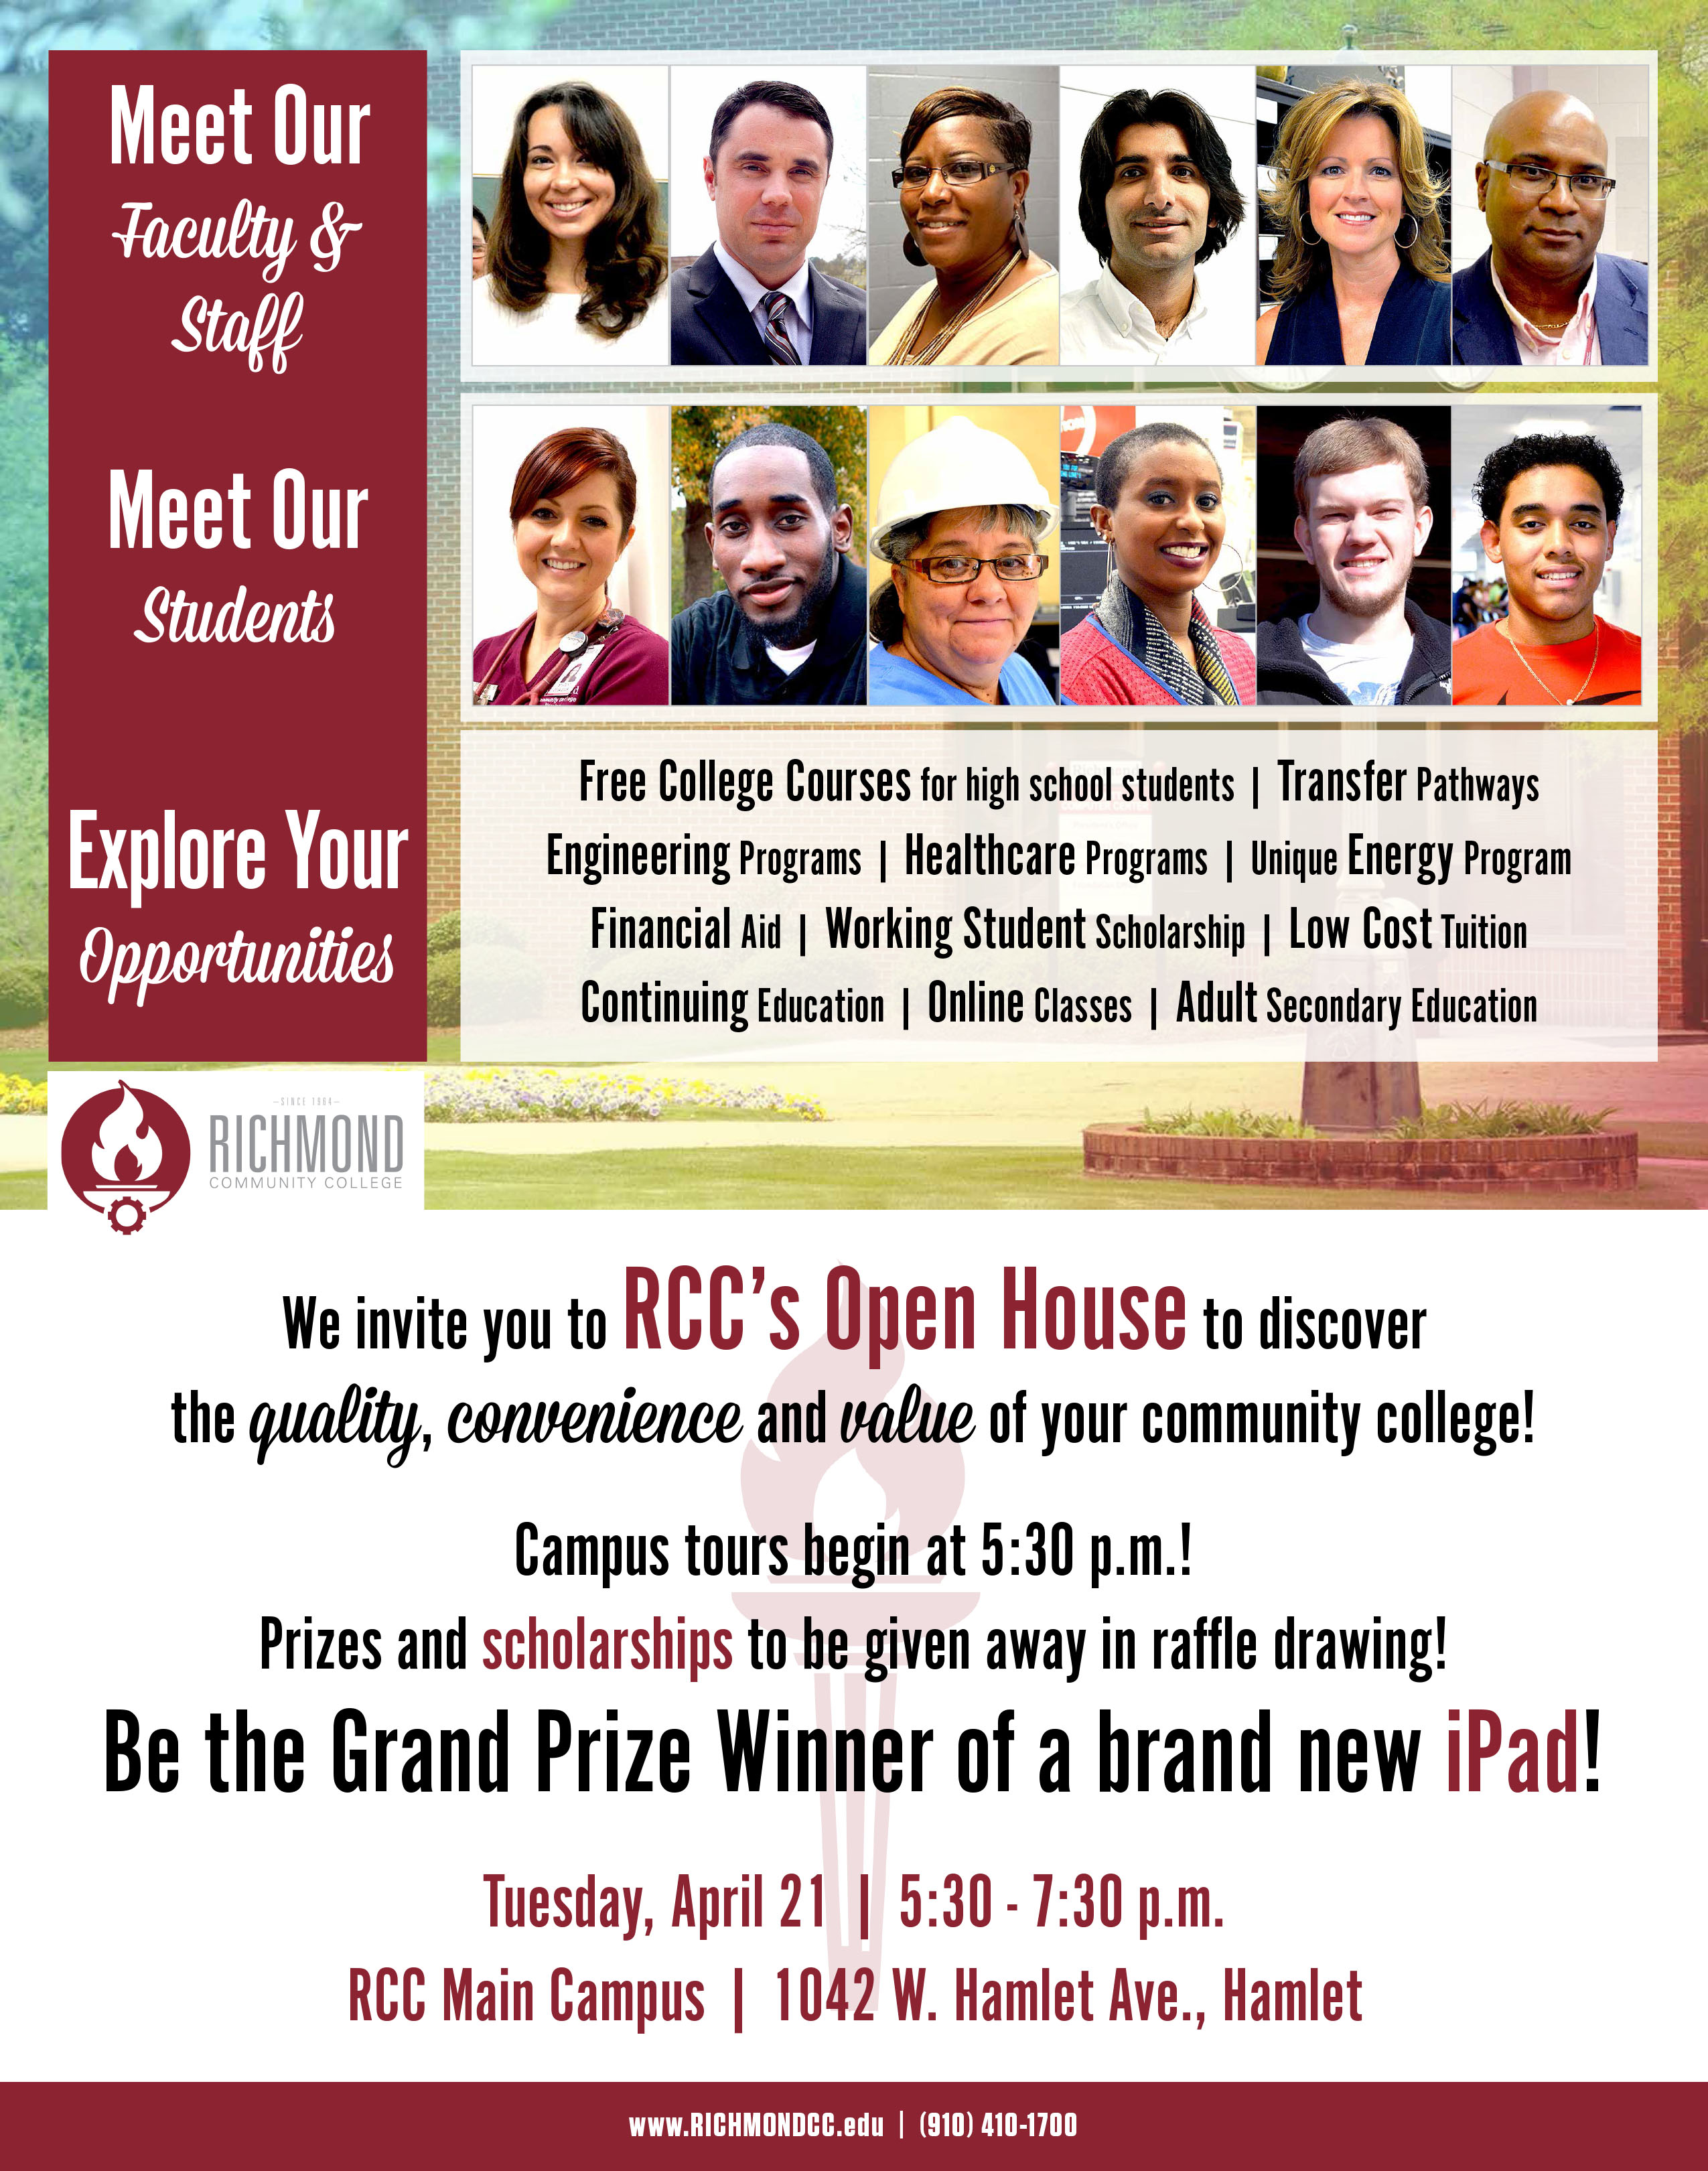 Open House flyer with RCC students and staff pictures